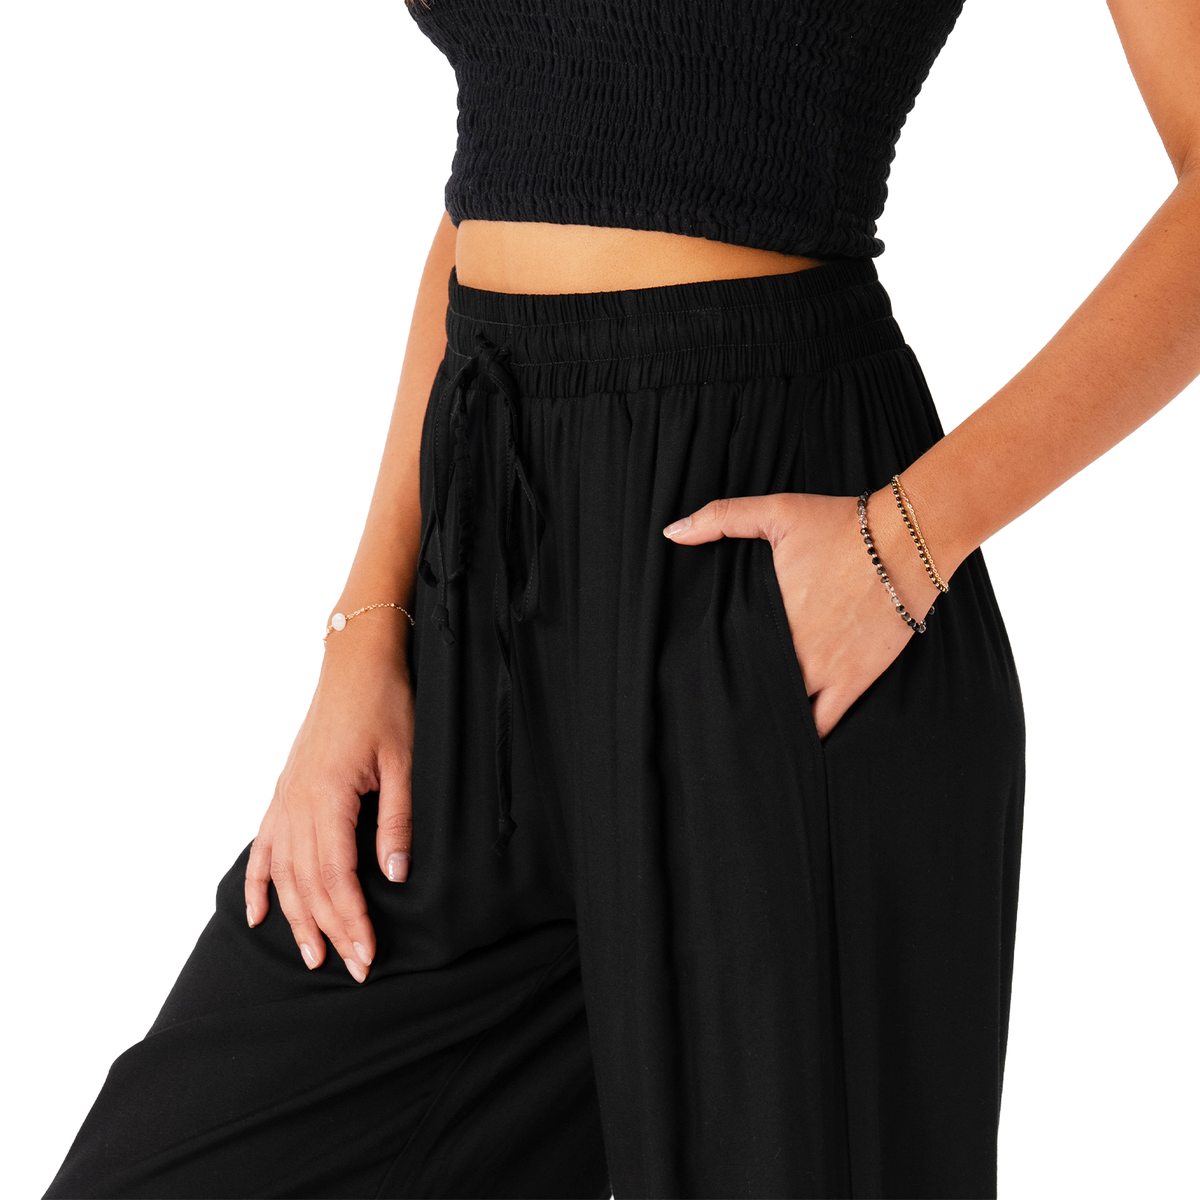 A close up photo of a model wearing black harem pants with a drawstring waistband